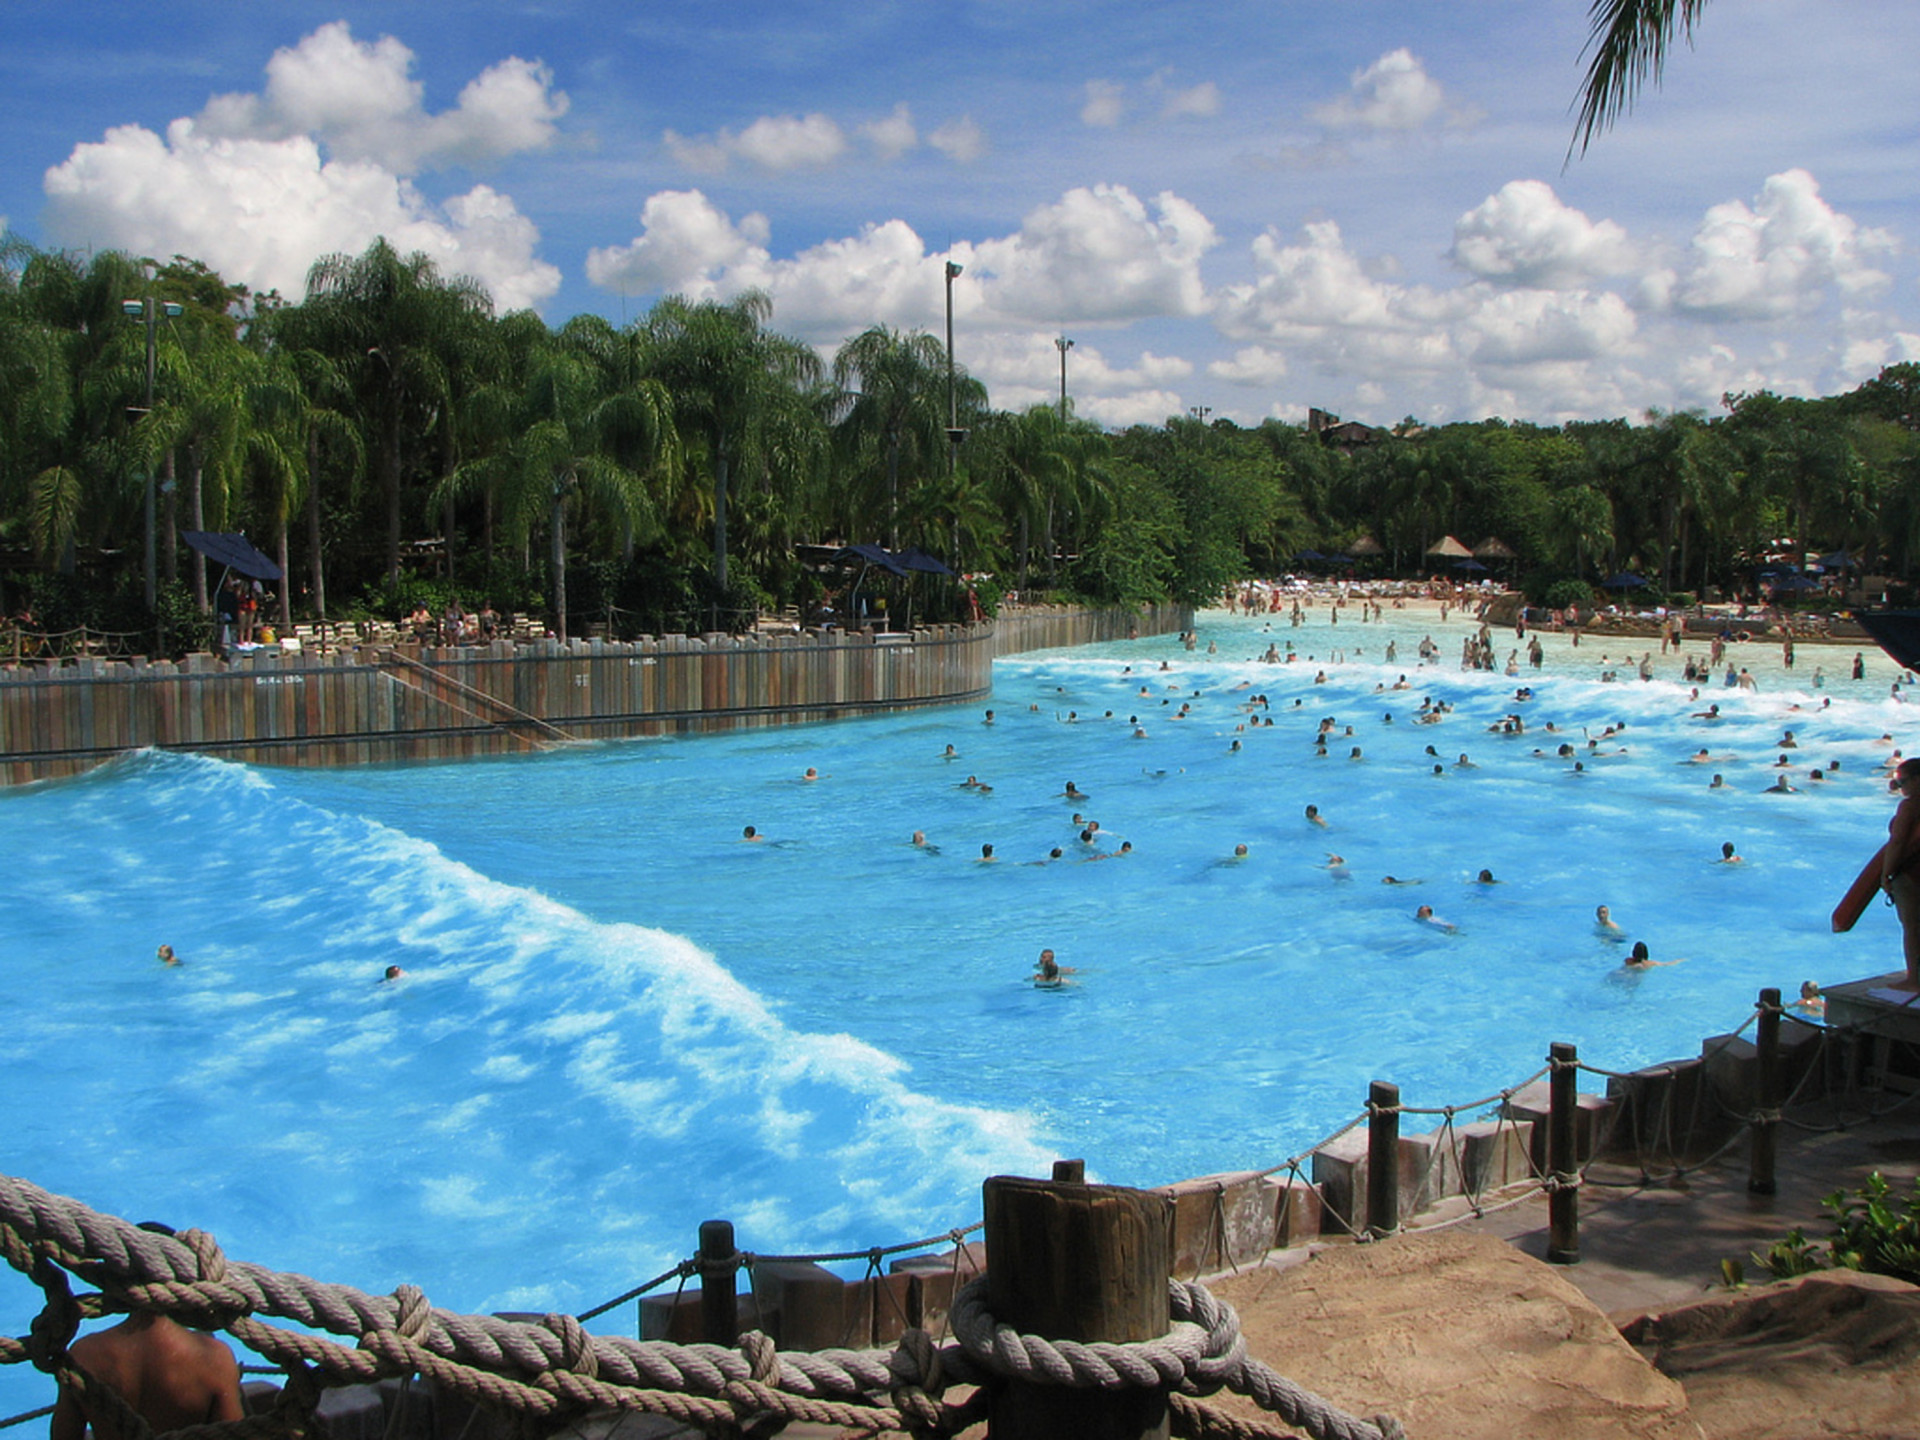 Also in Orlando, the Typhoon Lagoon has one of the biggest outdoor swimming pools in the world. <p>You may also like:<a href="https://www.starsinsider.com/n/443708?utm_source=msn.com&utm_medium=display&utm_campaign=referral_description&utm_content=150139v2en-ae"> What to eat for good spinal health</a></p>